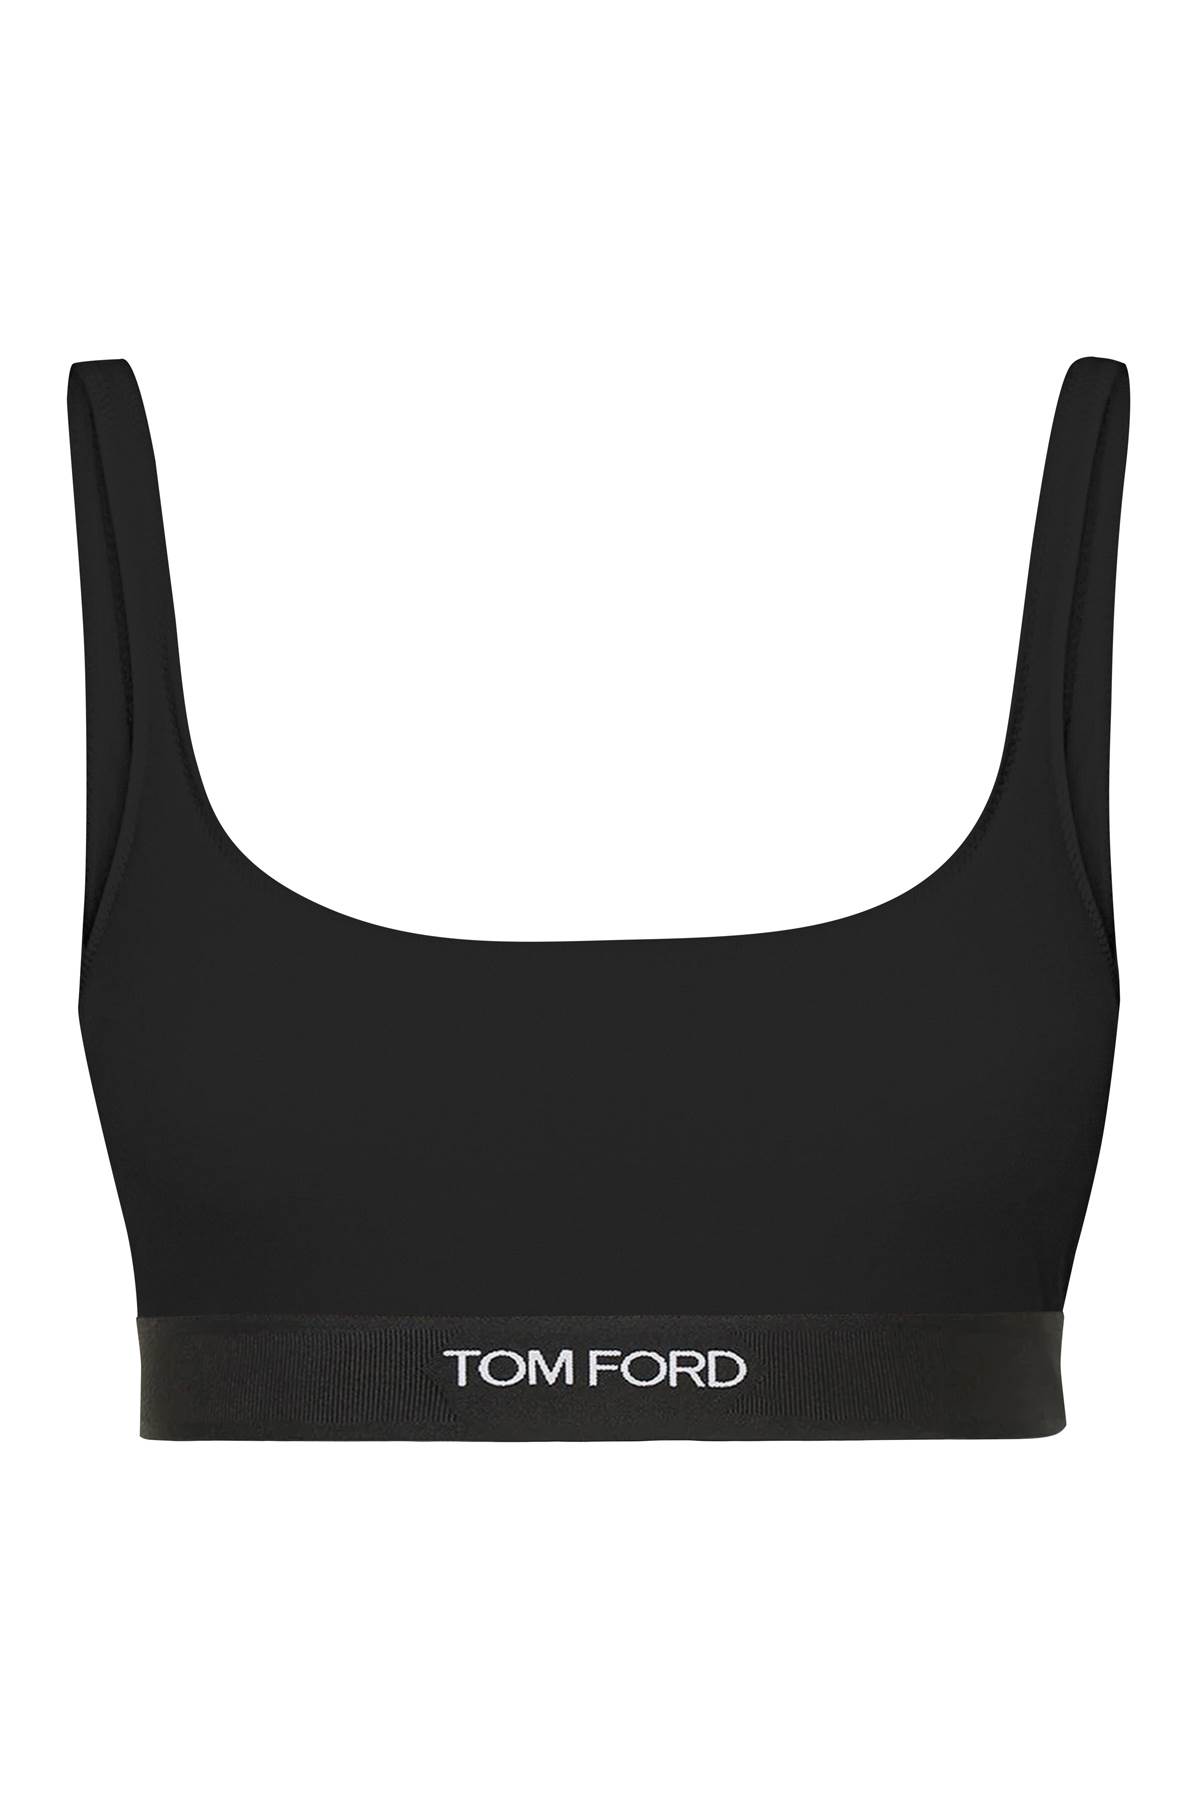 TOM FORD BRALETTE WITH LOGO BAND